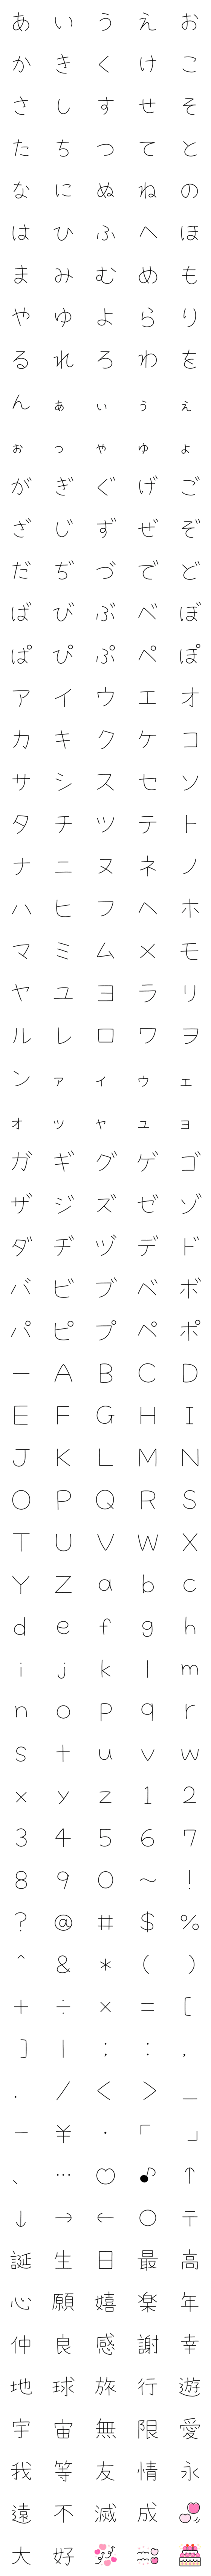 [LINE絵文字]丸くてゆるい♡手書き文字＆絵文字♡の画像一覧